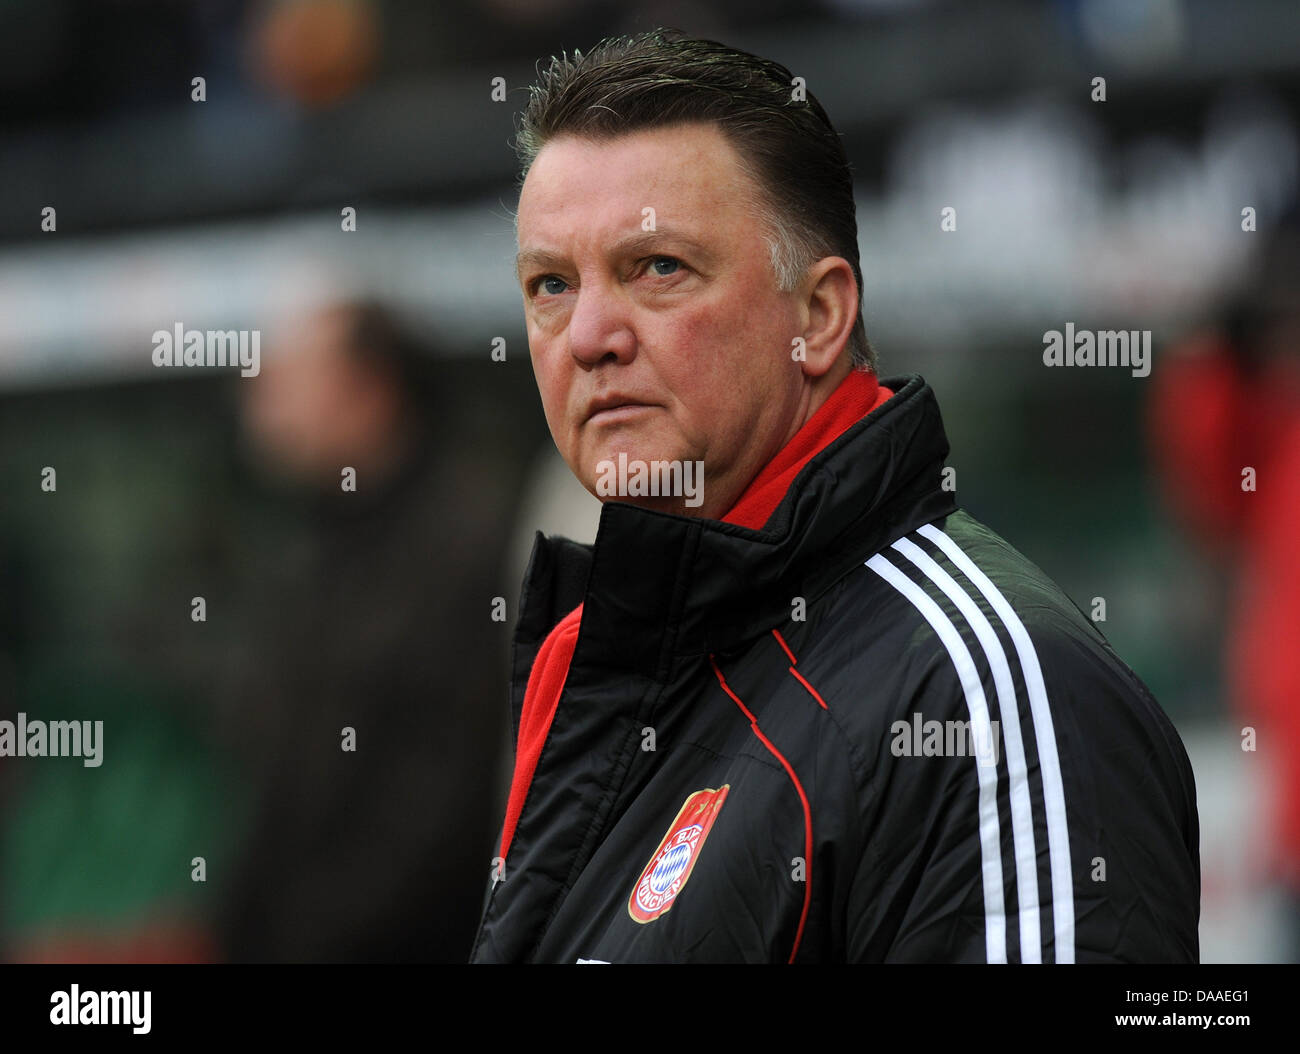 Bayern Munich's head coach Louis van Gaal arrives at the stadium prior to the Bundesliga soccer match between Werder Bremen and Bayern Munich in the Weser Stadion in Bremen, Germany, 29 January 2011. Photo: Ingo Wagner Stock Photo